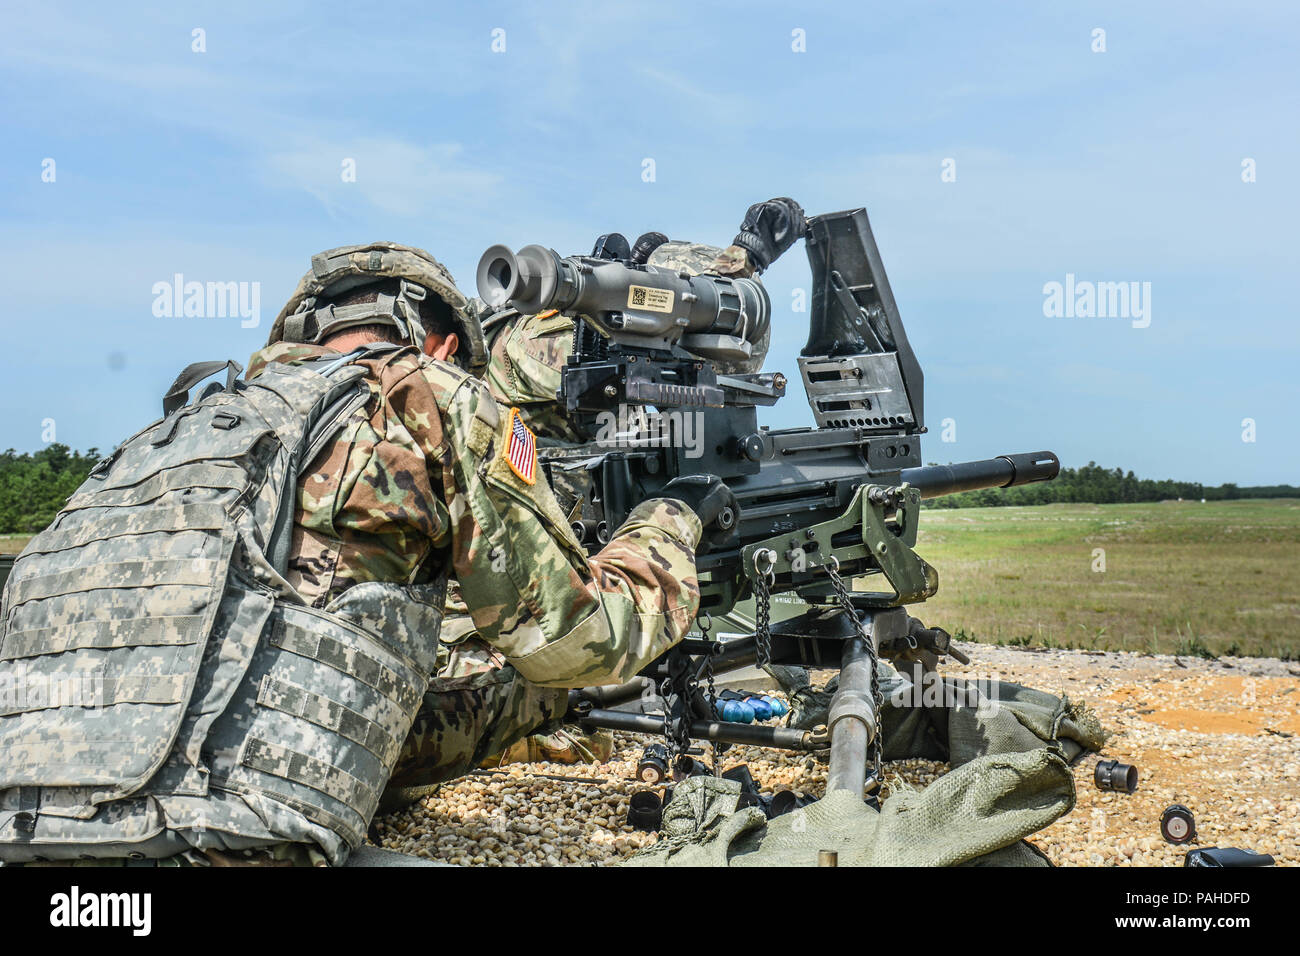 U.S. Army Reserve Troop List Unit Soldiers clear a Mark 19 40 mm grenade machine gun while qualifying during Operation Cold Steel II, hosted by U.S. Army Civil Affairs and Psychological Operations Command (Airborne), July 13, 2018 at Joint Base McGuire-Dix-Lakehurst, N.J. Operation Cold Steel is the U.S. Army Reserve's crew-served weapons qualification and validation exercise to ensure America's Army Reserve units and Soldiers are trained and ready to deploy on short notice as part of Ready Force X and bring combat-ready and lethal firepower in support of the Army and our joint partners anywhe Stock Photo